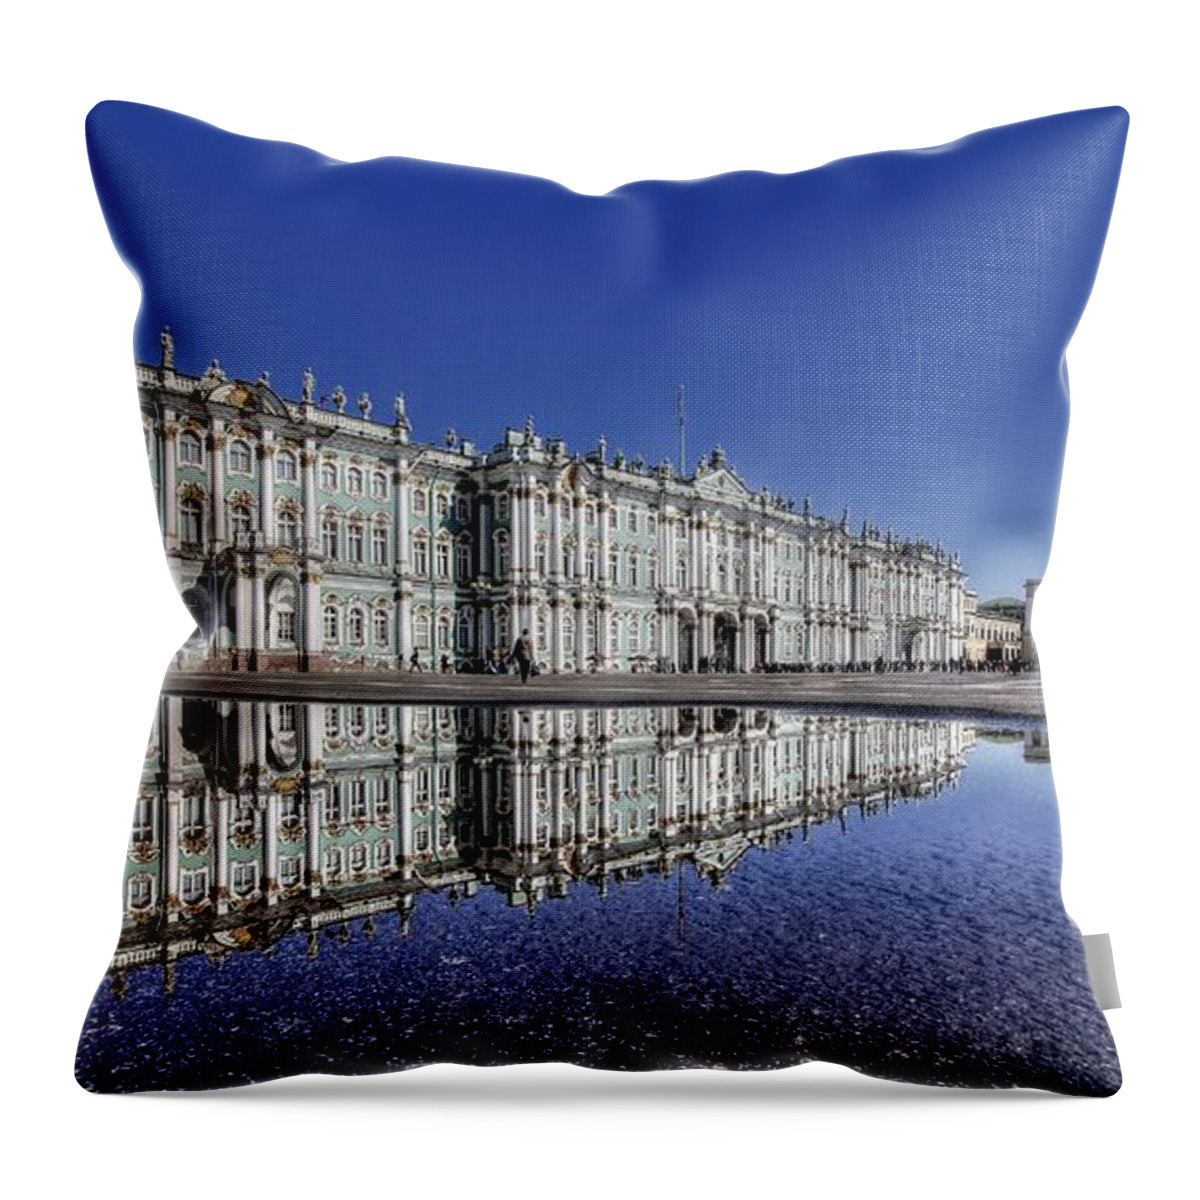 St. Petersburg Russia Throw Pillow featuring the photograph St. Petersburg Russia by Paul James Bannerman